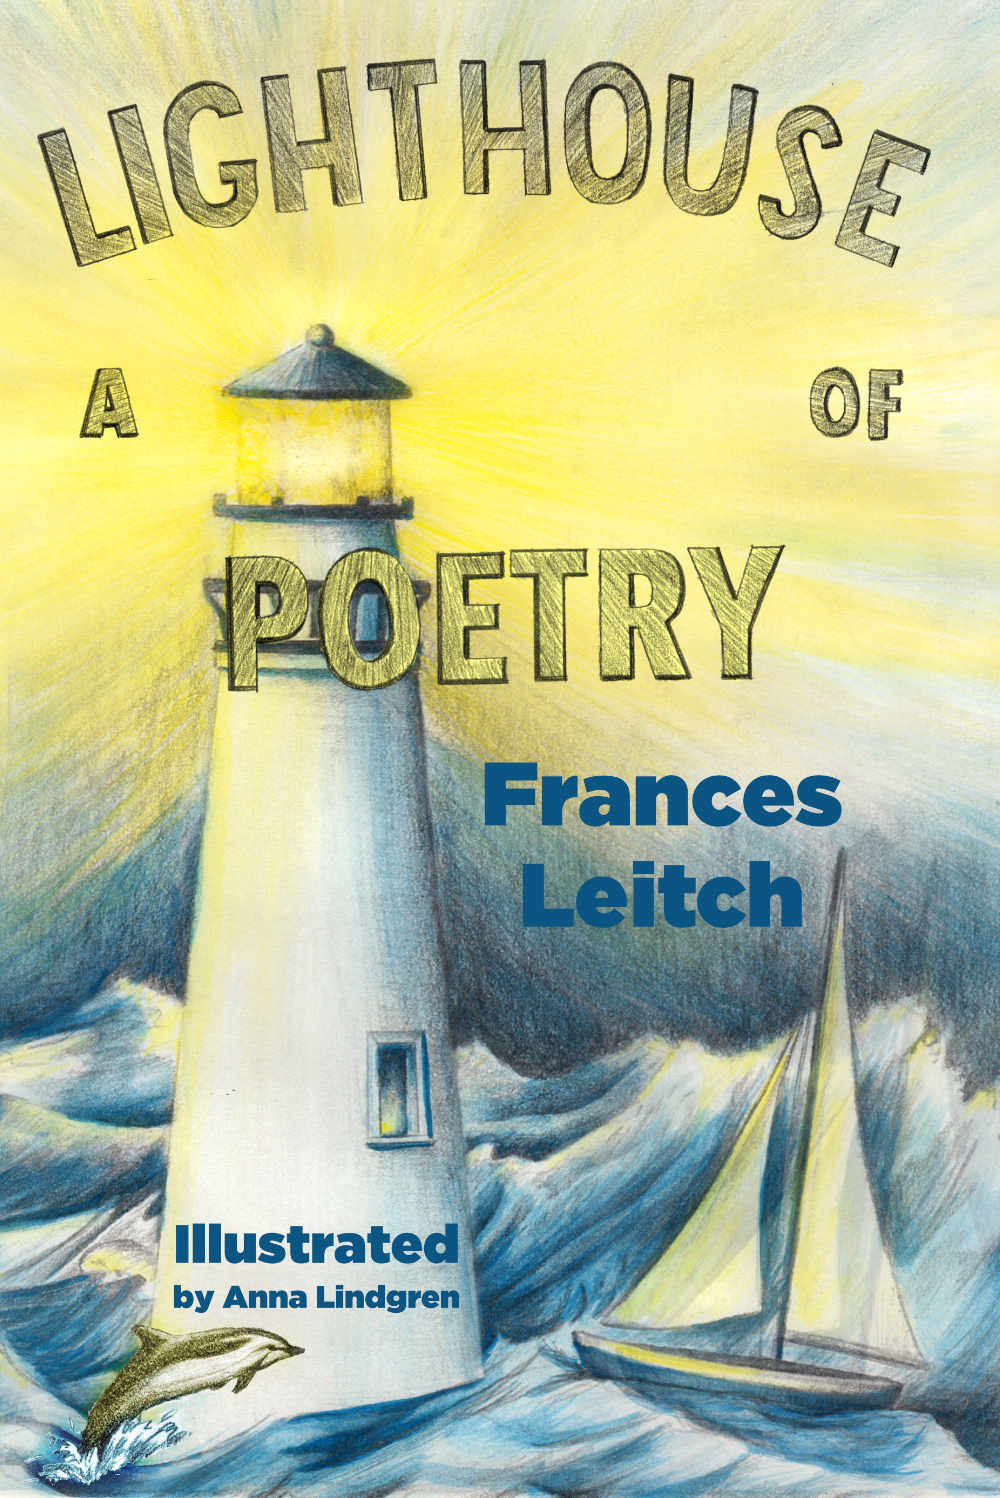 A Lighthouse of Poetry